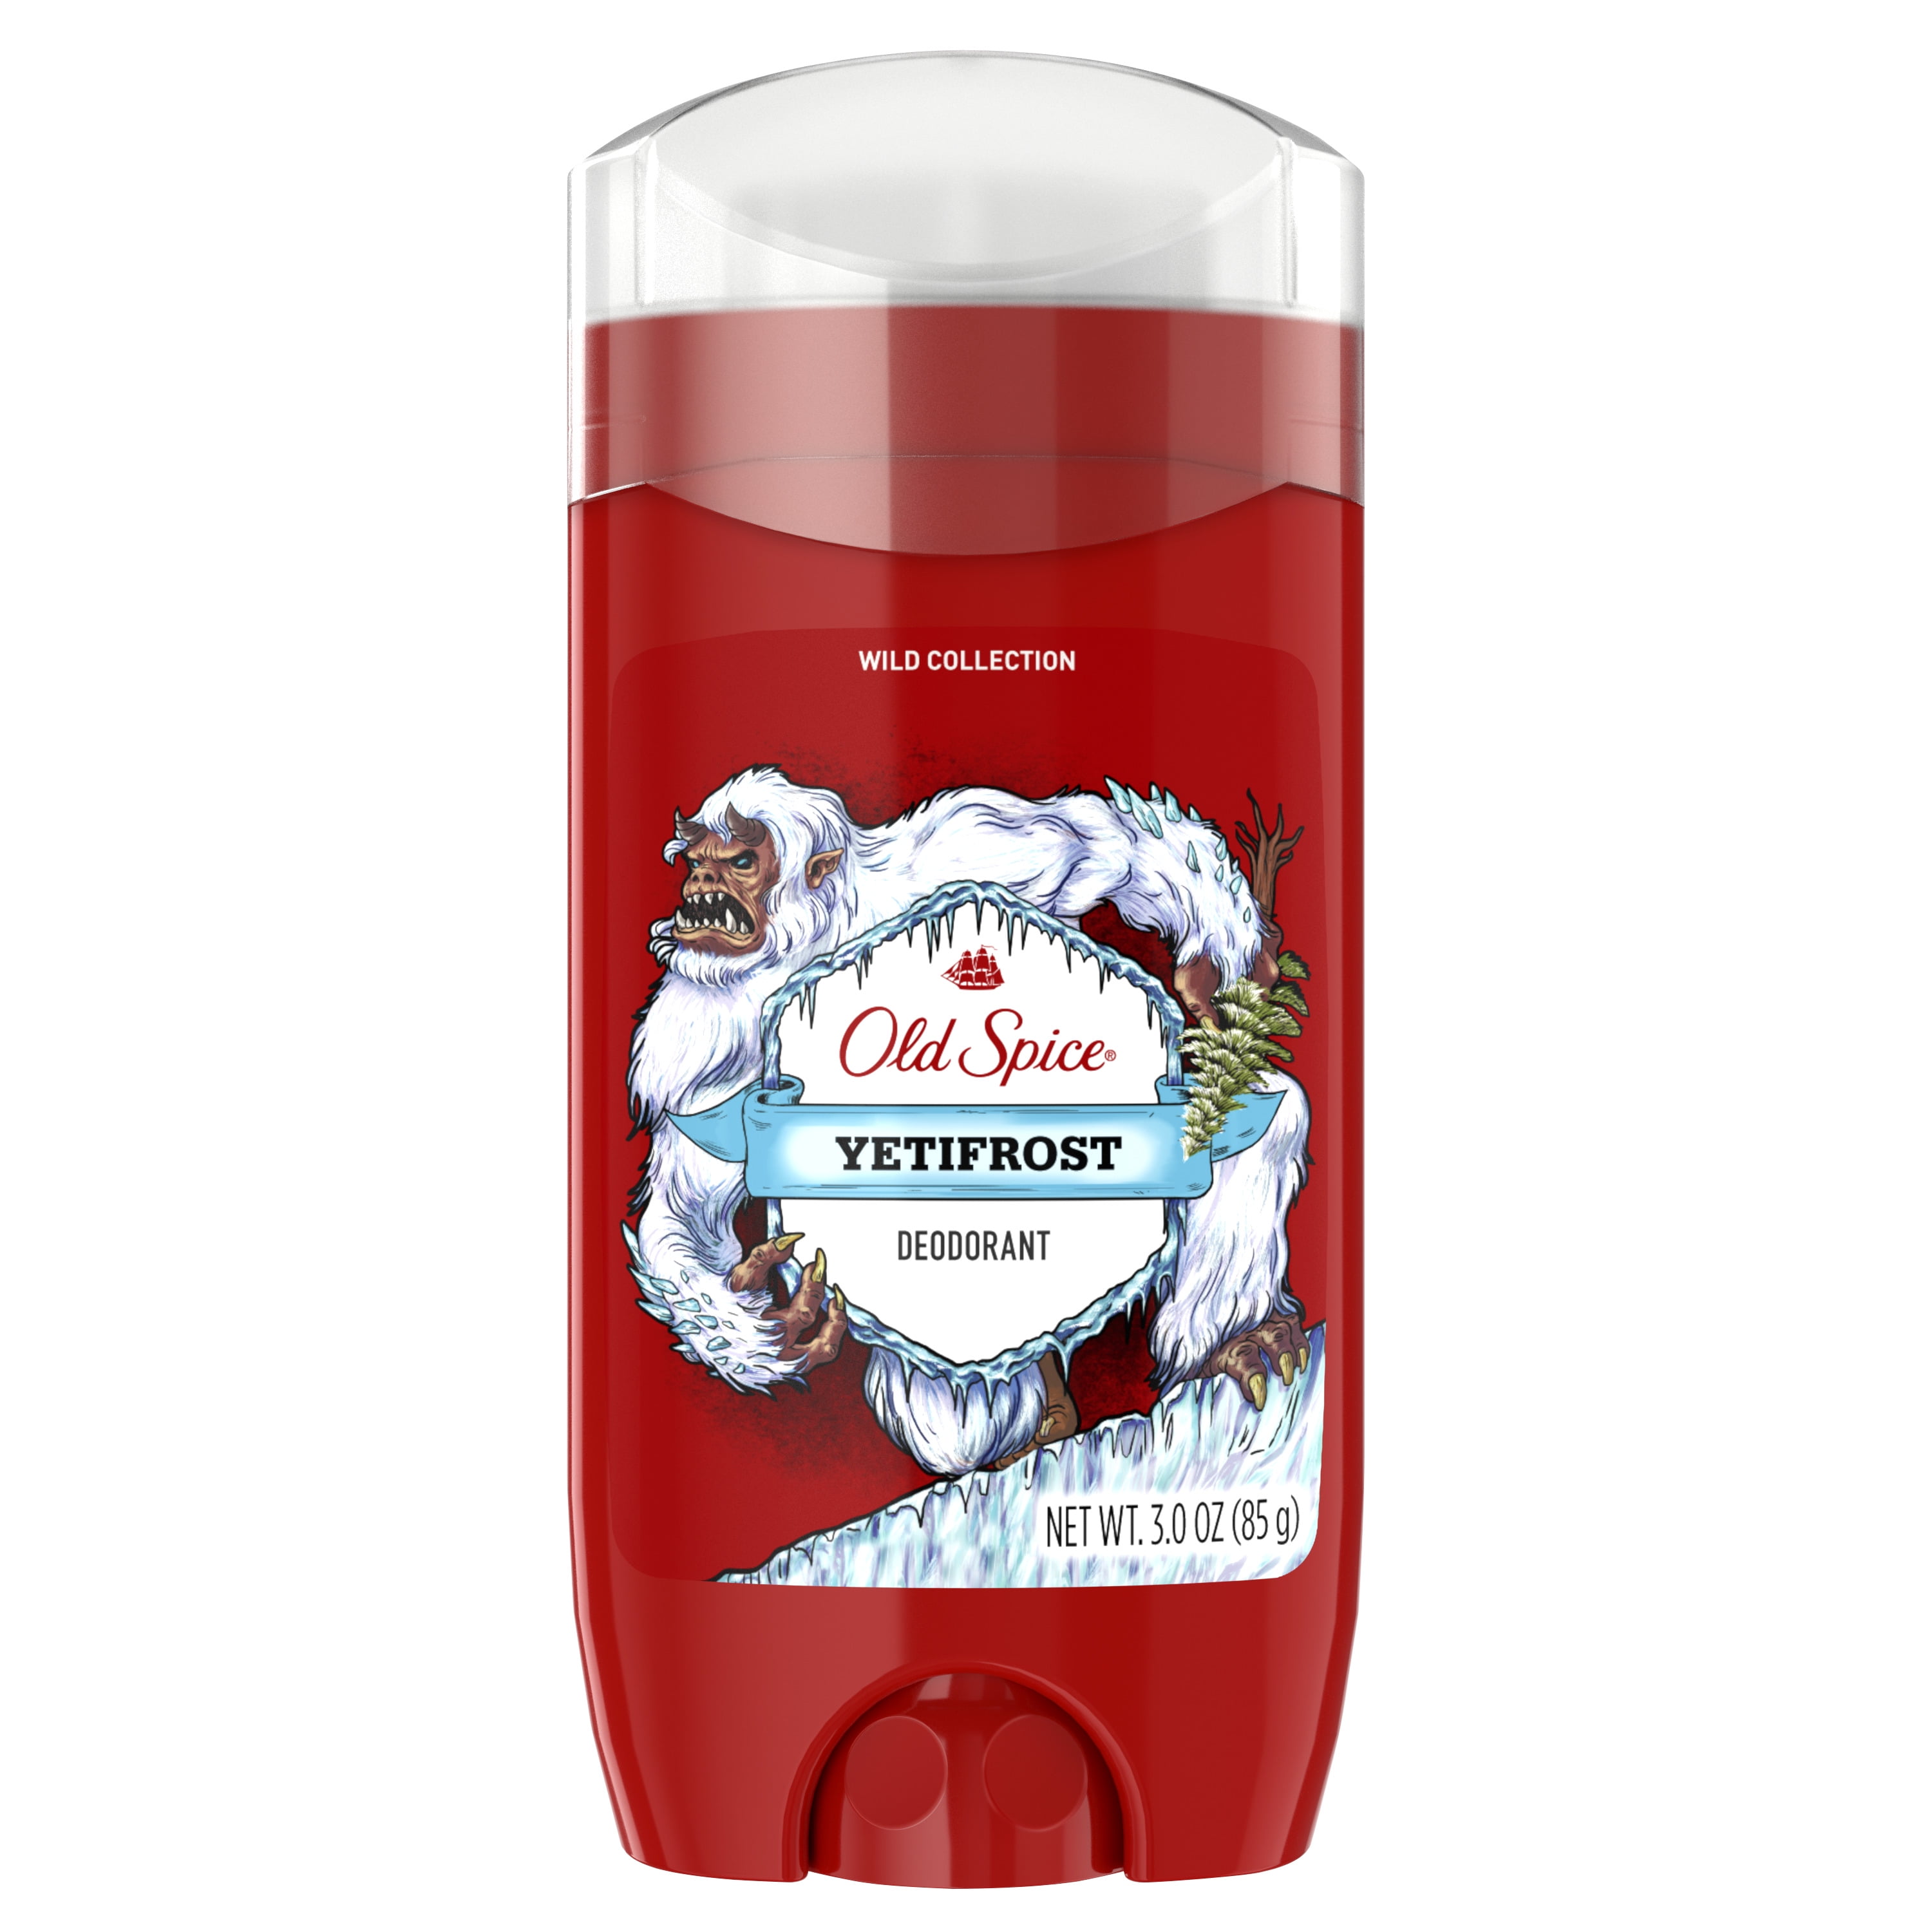 Old Spice Wild Collection Yetifrost Scent Deodorant for Men, oz - Walmart.com